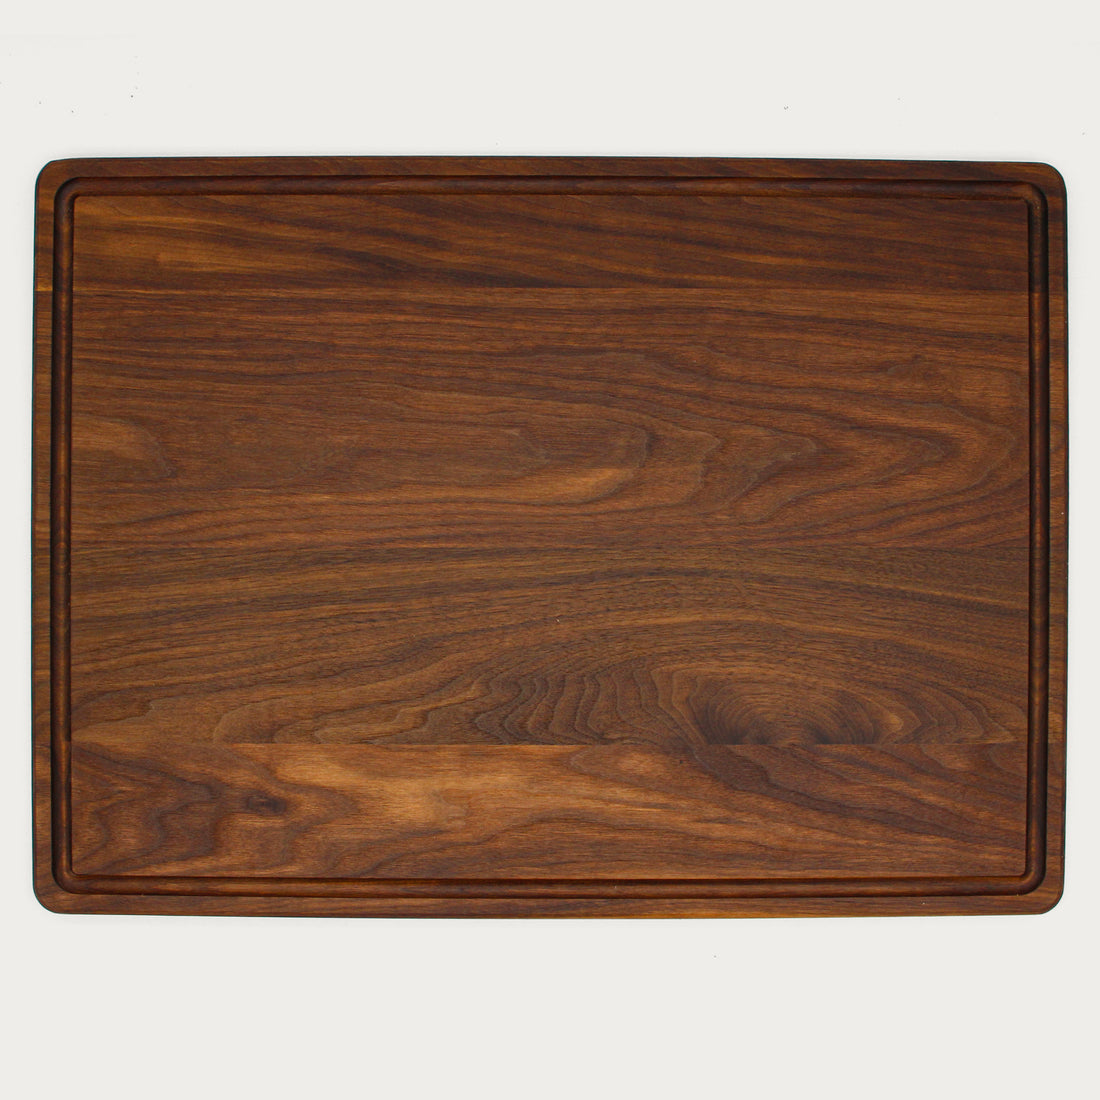 Family Sized Walnut Cutting Board 24in x 18in (Optional Engraving)